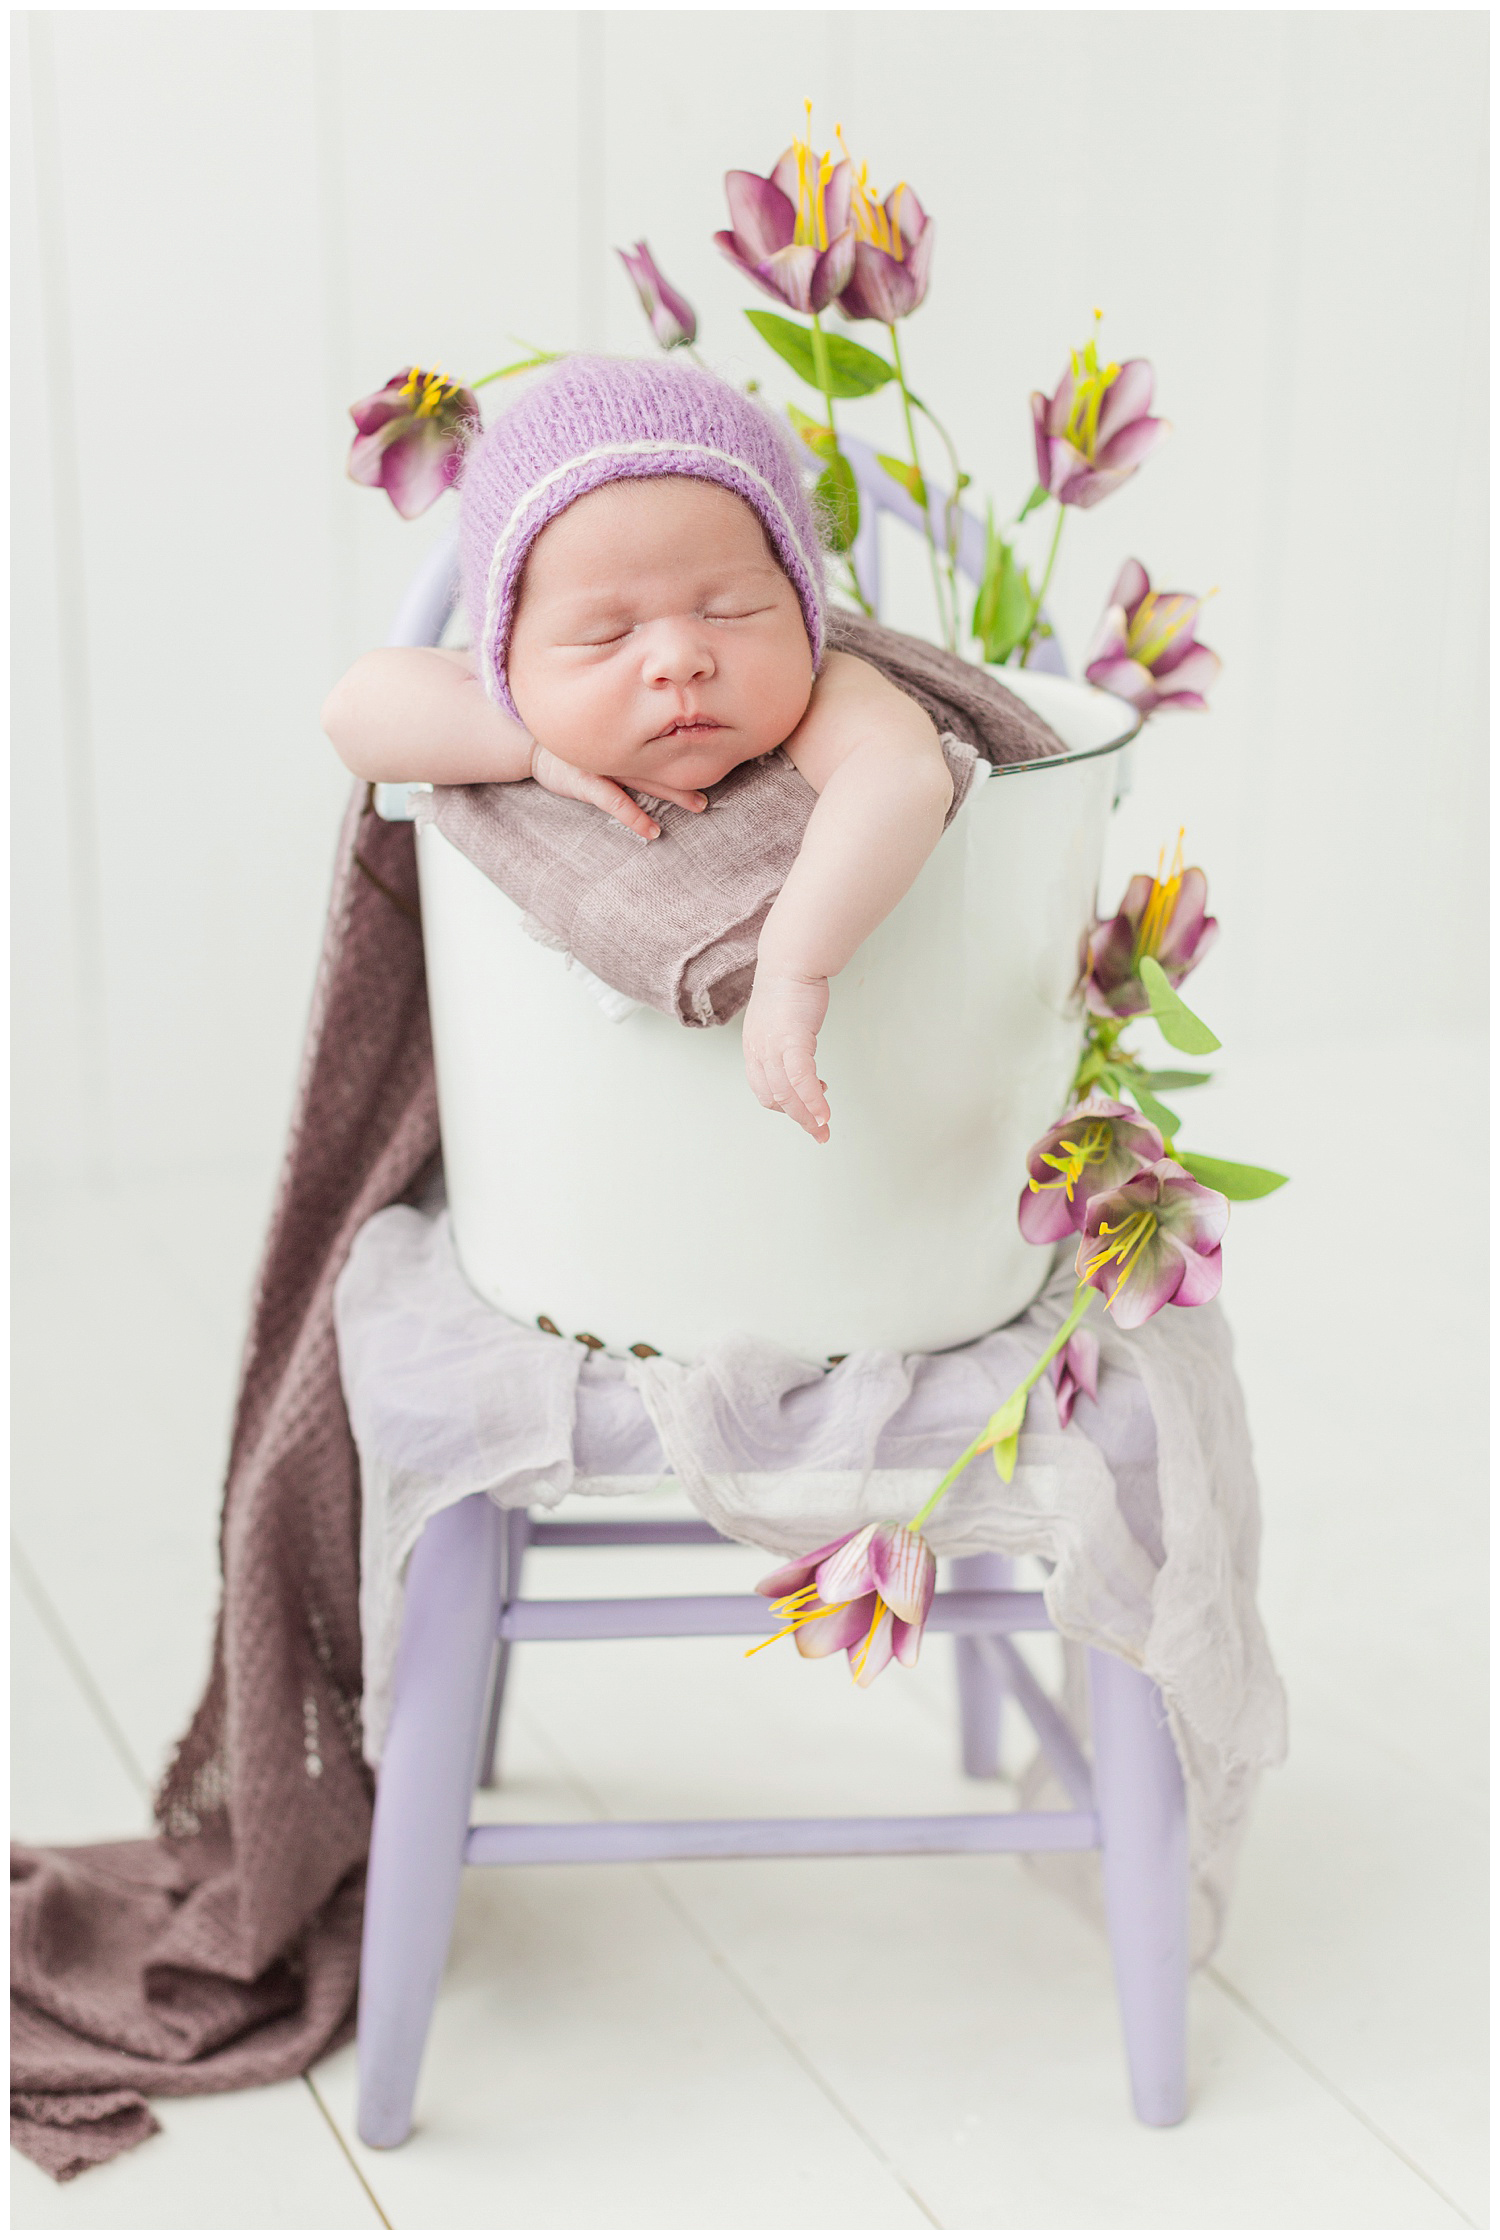 Baby Emma nestled in a bucket pose with purple florals surrounding her | CB Studio